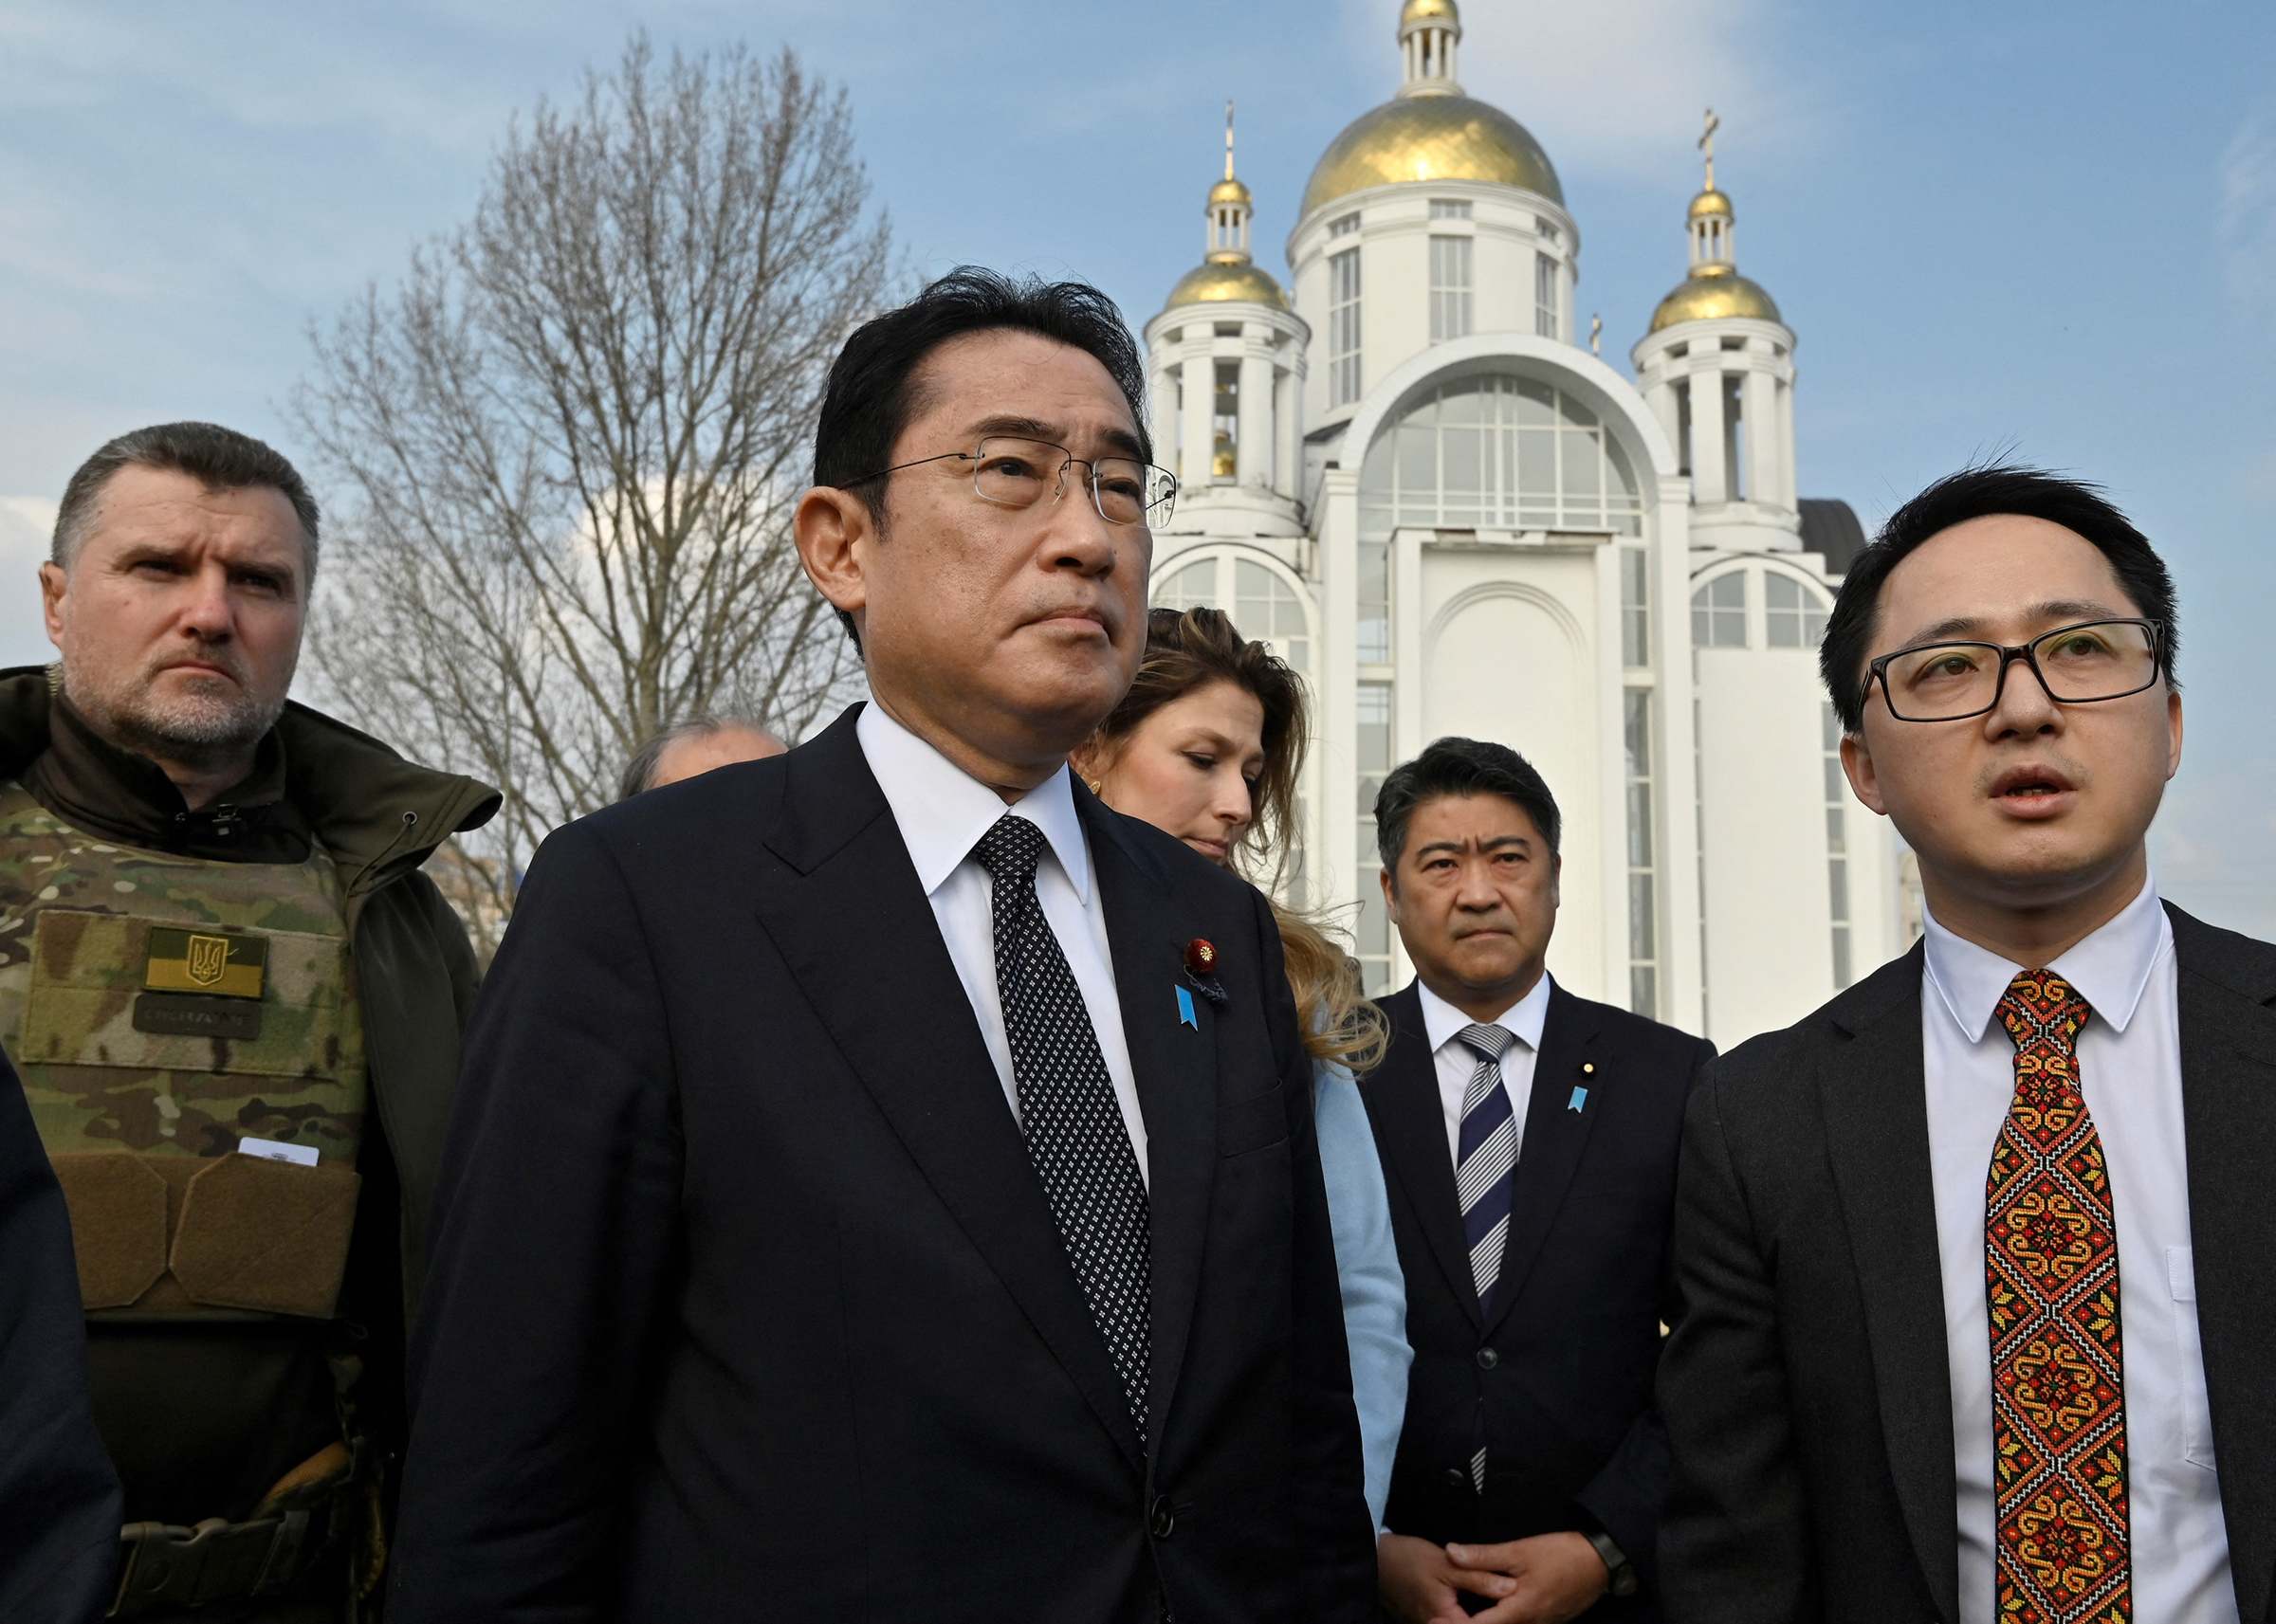 Kishida visits a mass grave site discovered at Church of St. Andrew and Pyervozvannoho All Saints in Bucha, Ukraine, on March 21. (Sergei Chuzavkov—AFP/Getty Images)